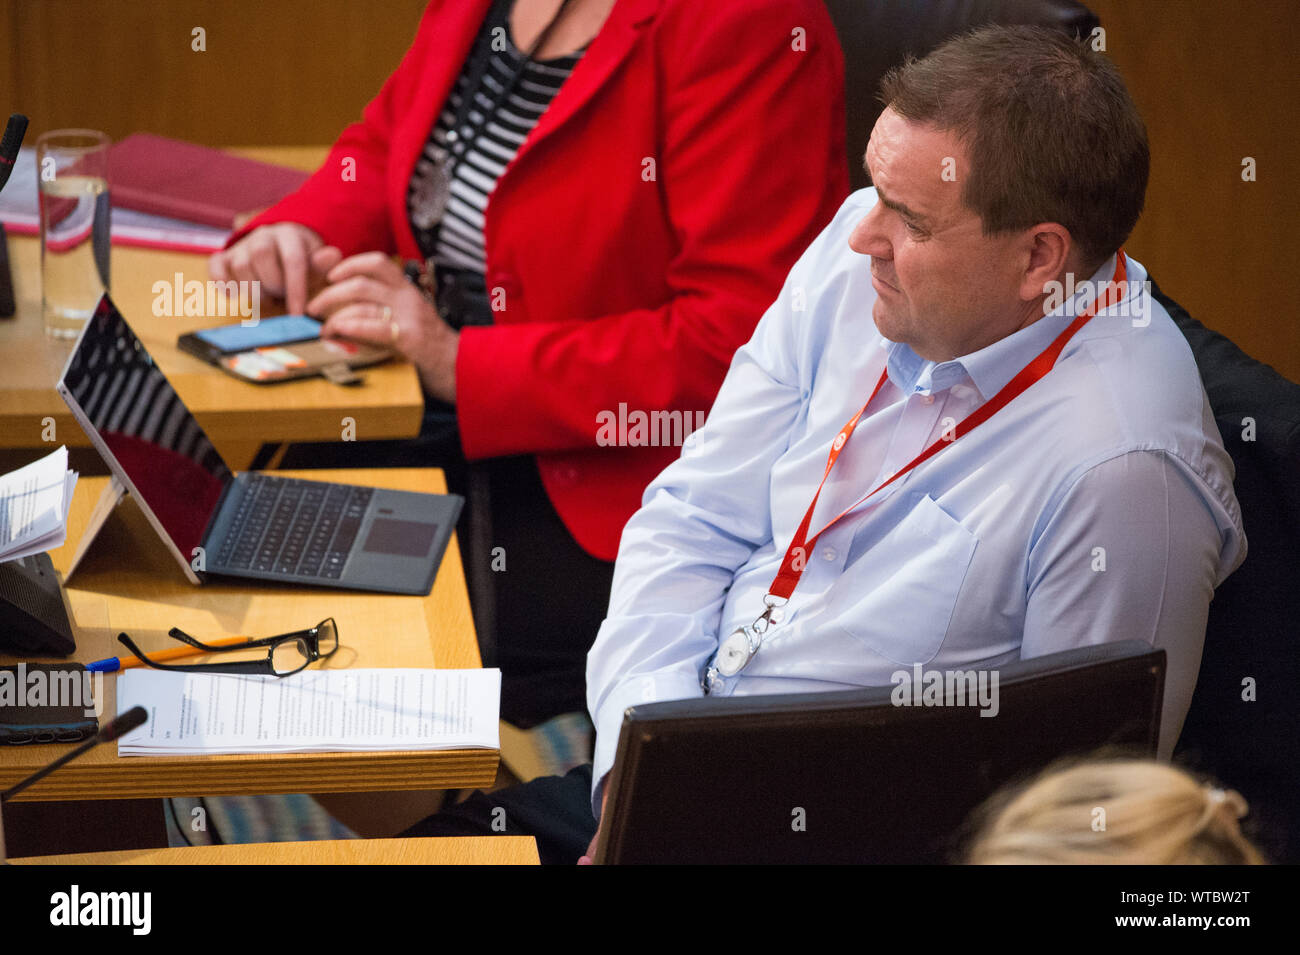 Edinburgh, UK. 5 September 2019. Pictured: Neil Findlay MSP - Member for Lothian. Scottish Government Debate: Avoiding A No Deal Exit From The EU.  That the Parliament agrees that the UK should in no circumstances leave the EU on a no-deal basis, and condemns the Prime Minister’s suspension of the UK Parliament from as early as 9 September until 14 October 2019. The result of the division is: For 87, Against 28, Abstentions 0. Colin Fisher/CDFIMAGES.COM Stock Photo